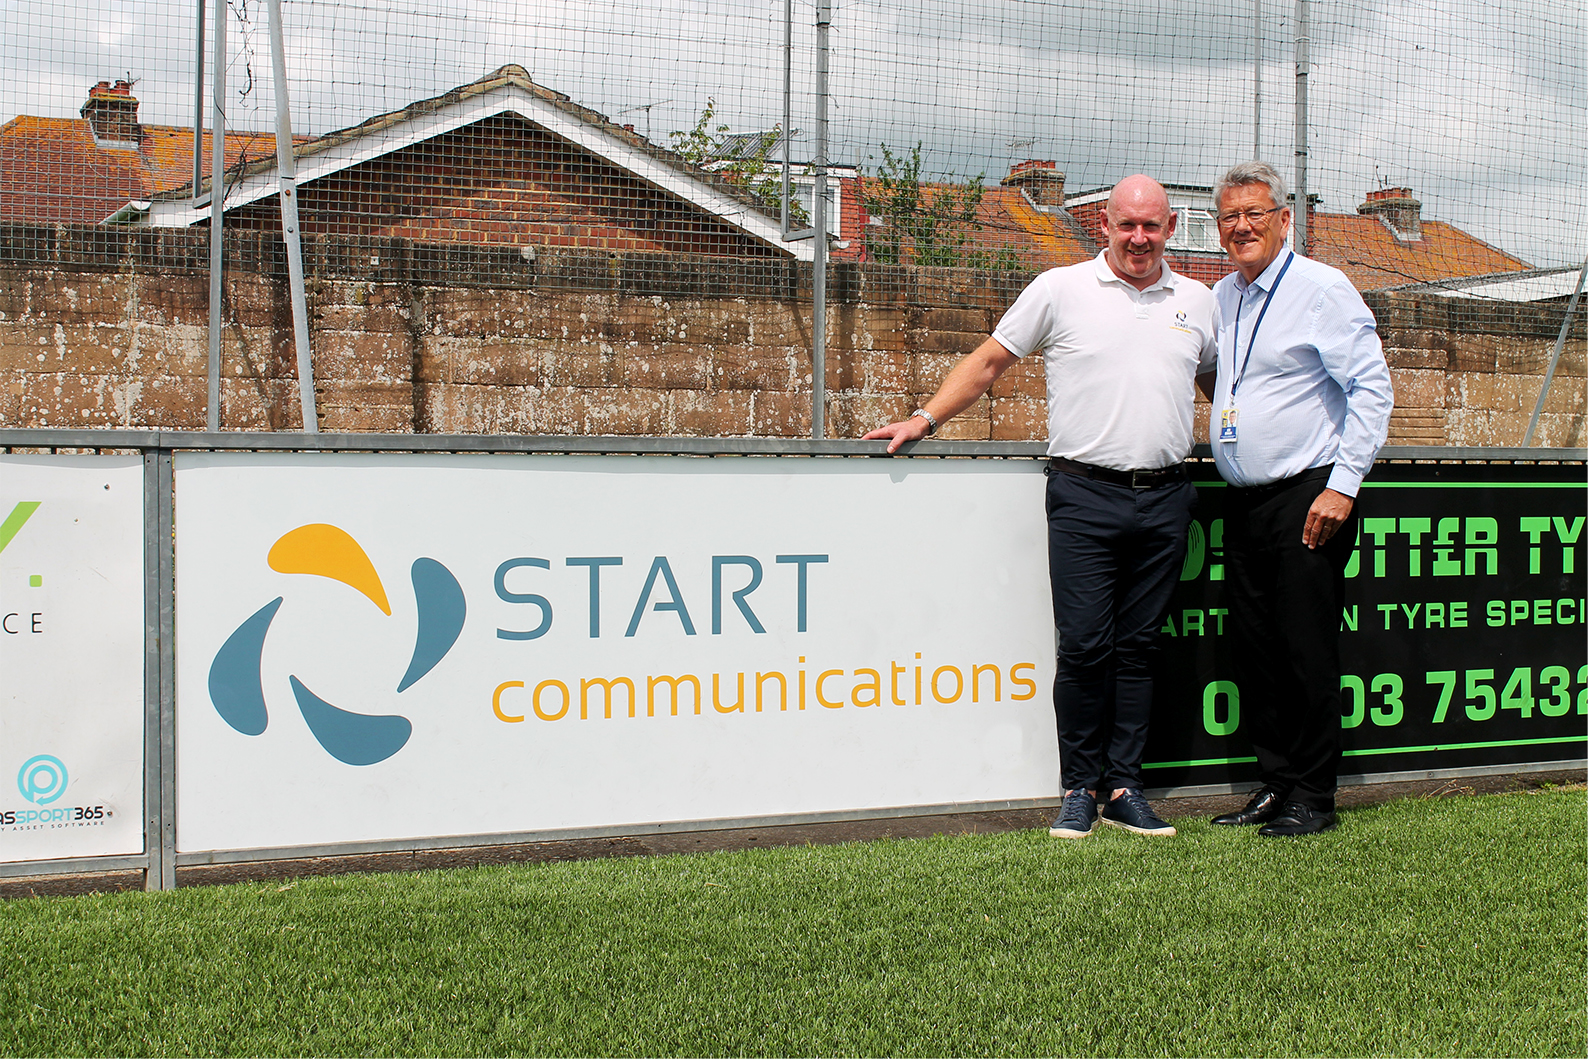 Partnership Announced with Sussex County FA